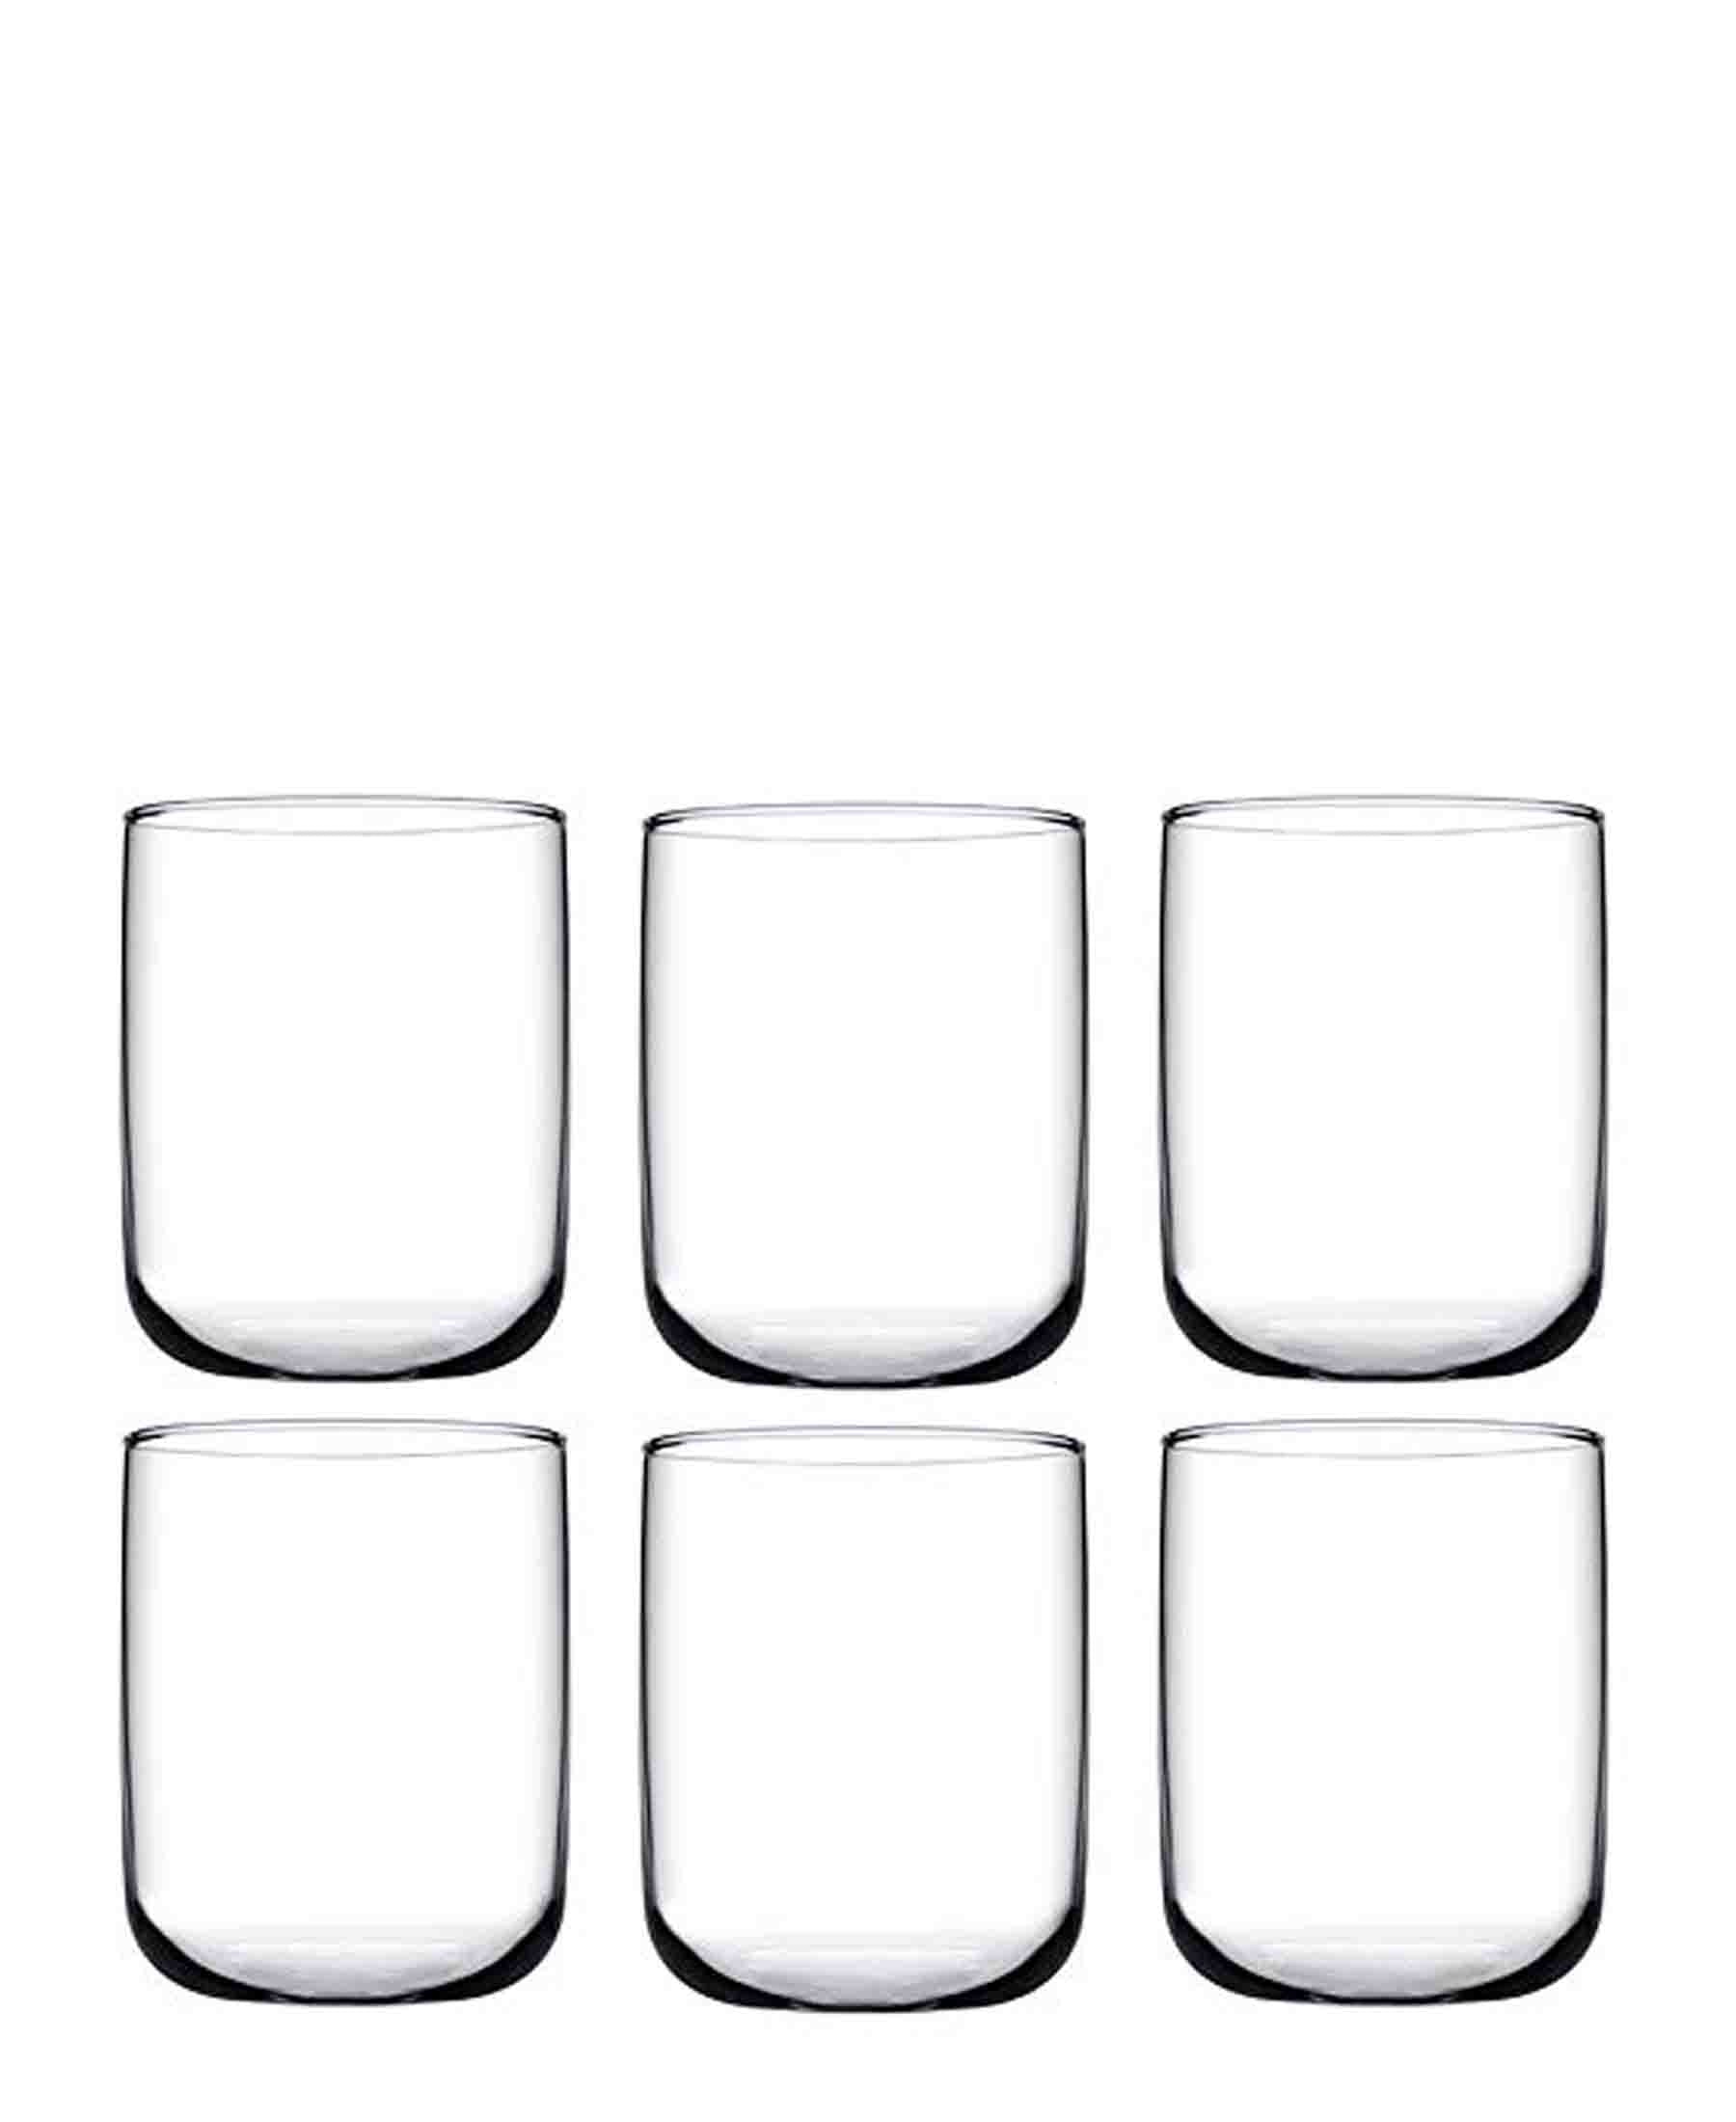 Pasabahce 6 Piece 280ml Iconic Whisky Glass Set - Clear